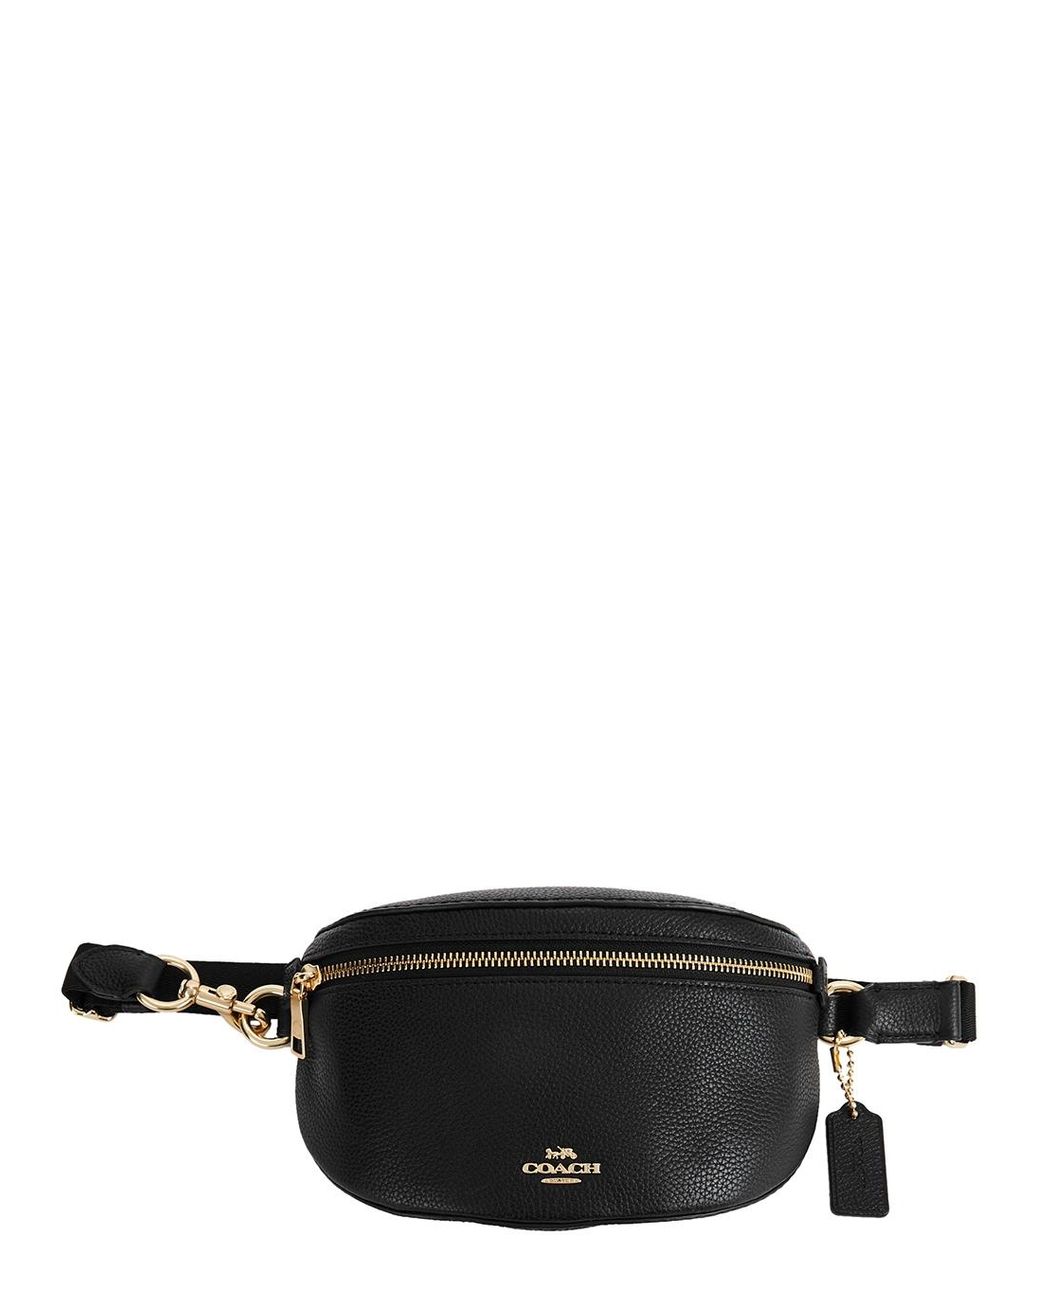 COACH Bethany Leather Belt Bag in Black | Lyst